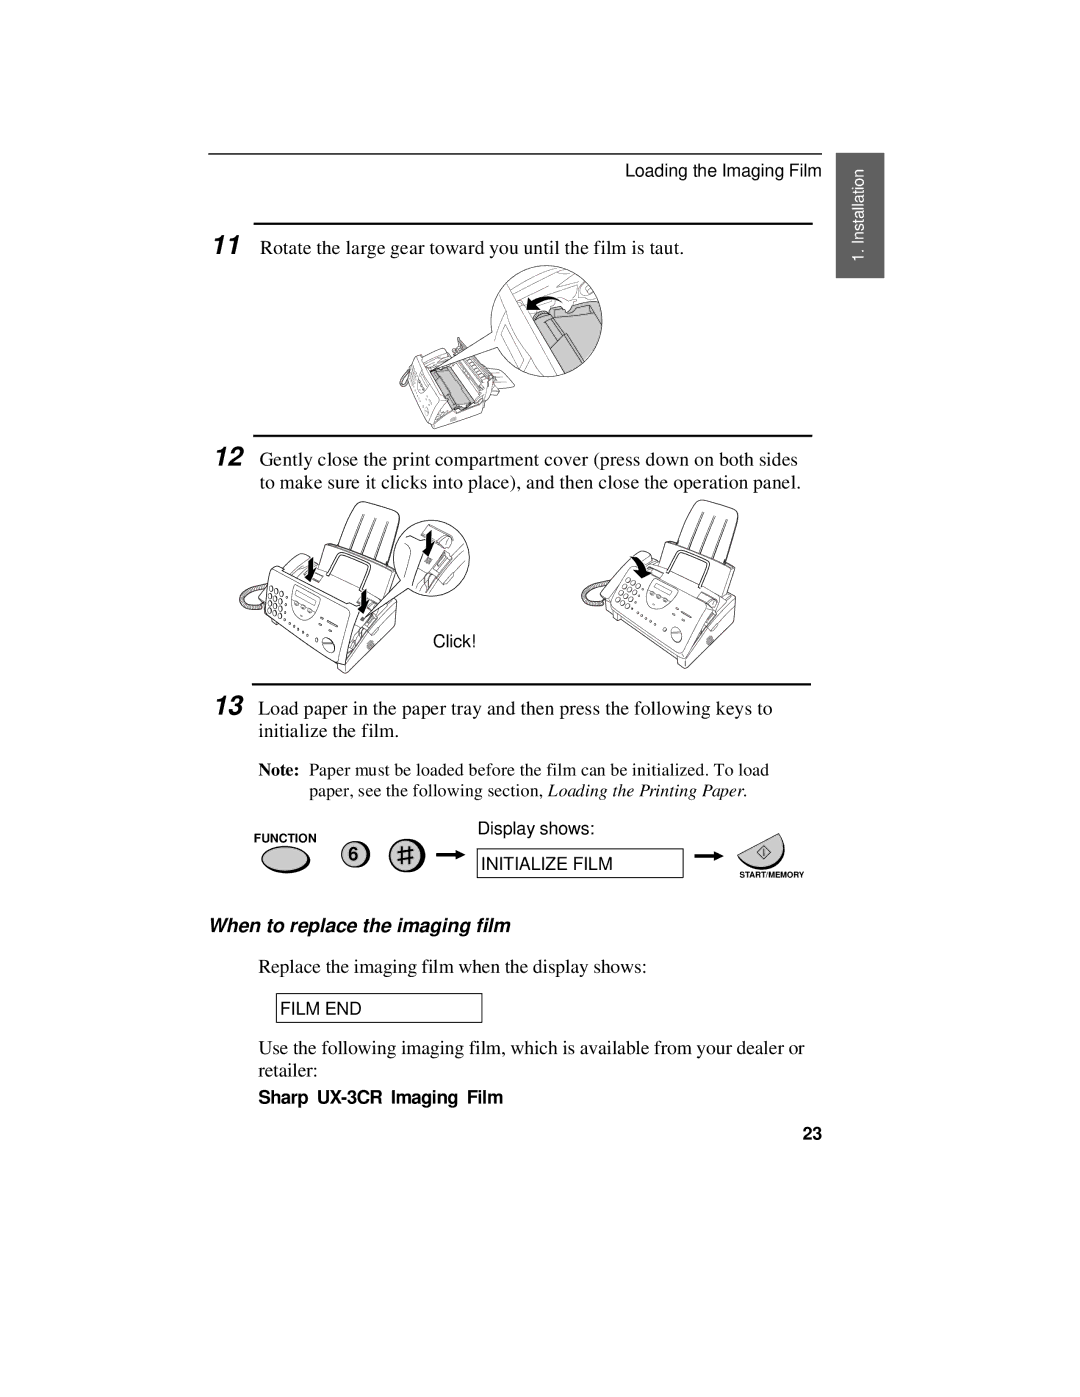 Sharp UX-470 operation manual When to replace the imaging film 